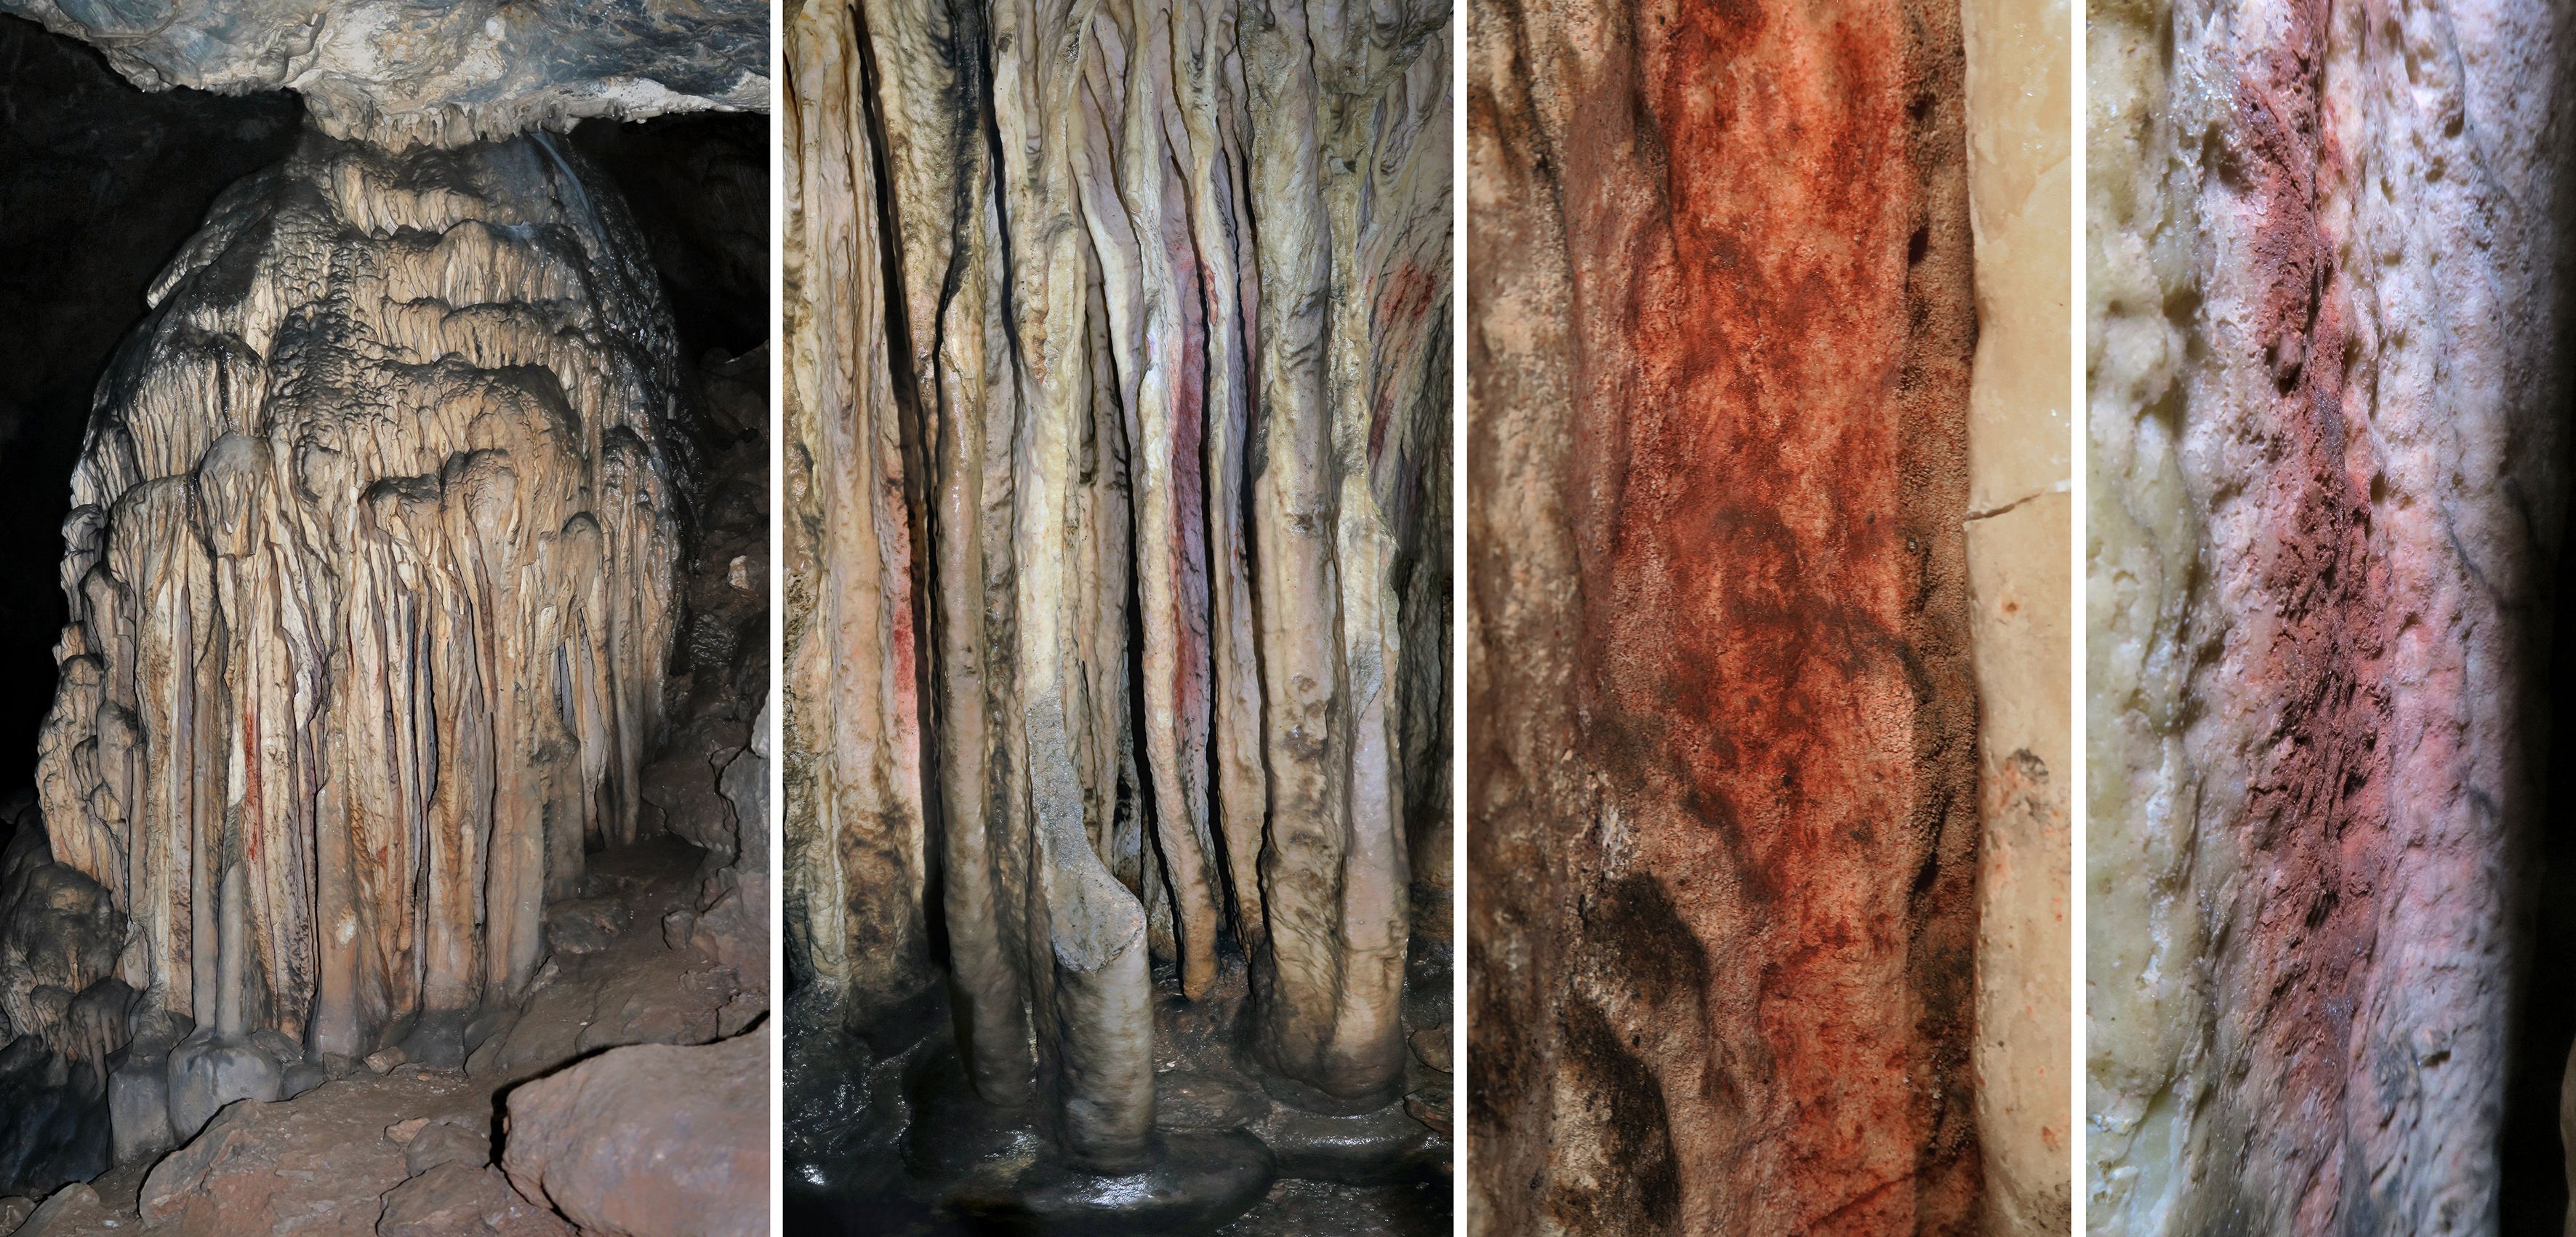 A general view and close-up of a partly coloured stalagmite tower in the Spanish cave of Ardales, southern Spain